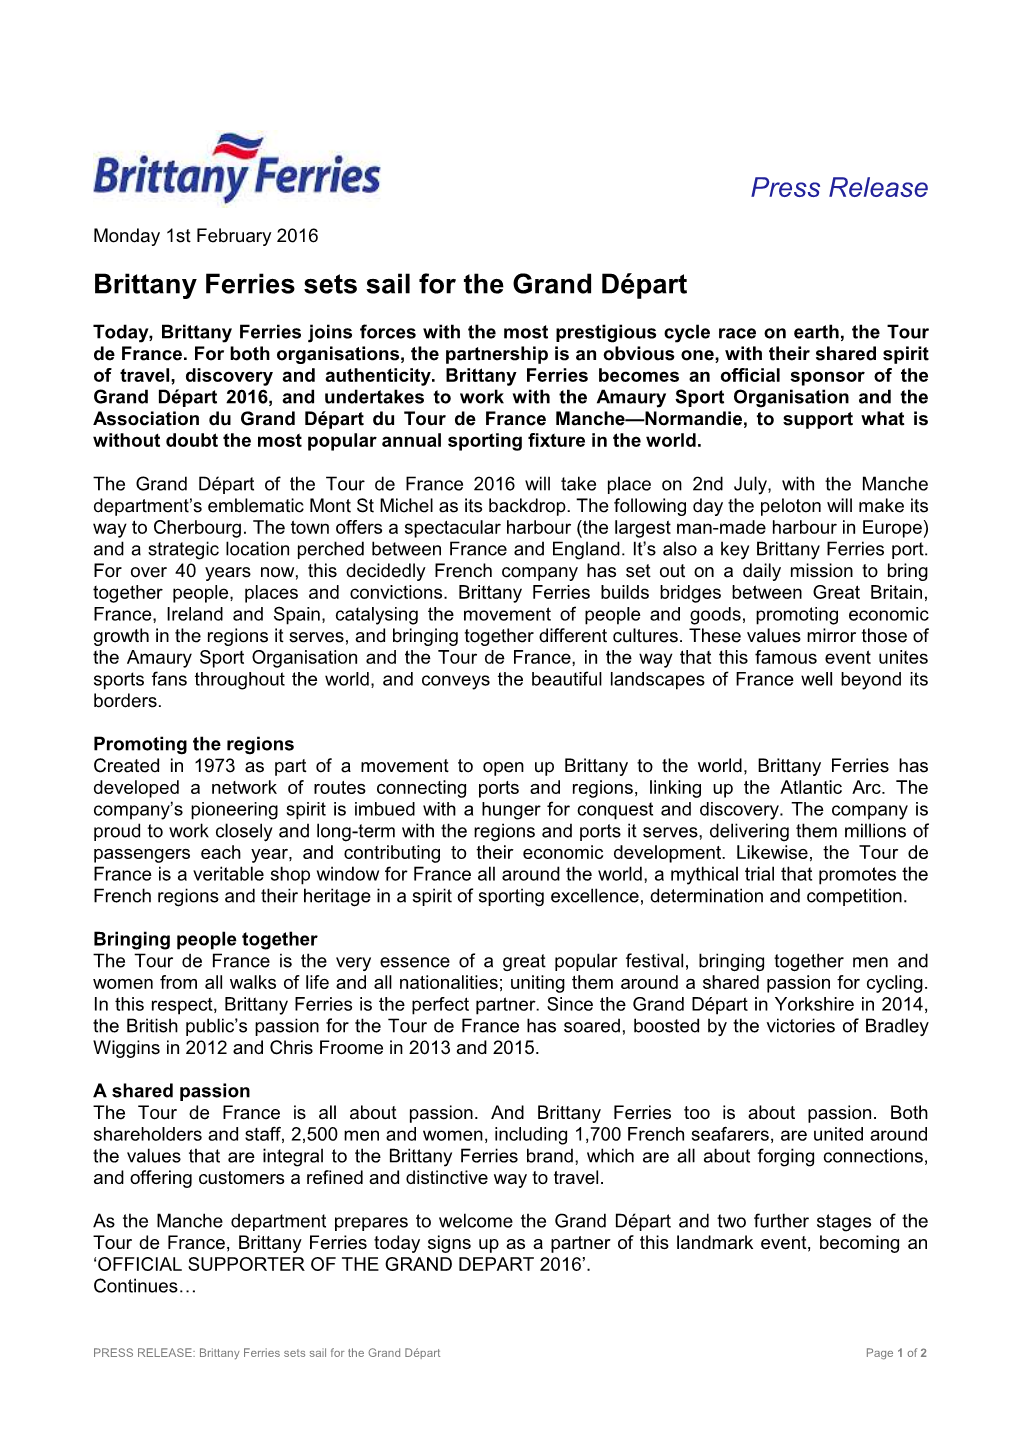 Brittany Ferries Sets Sail for the Grand Départ